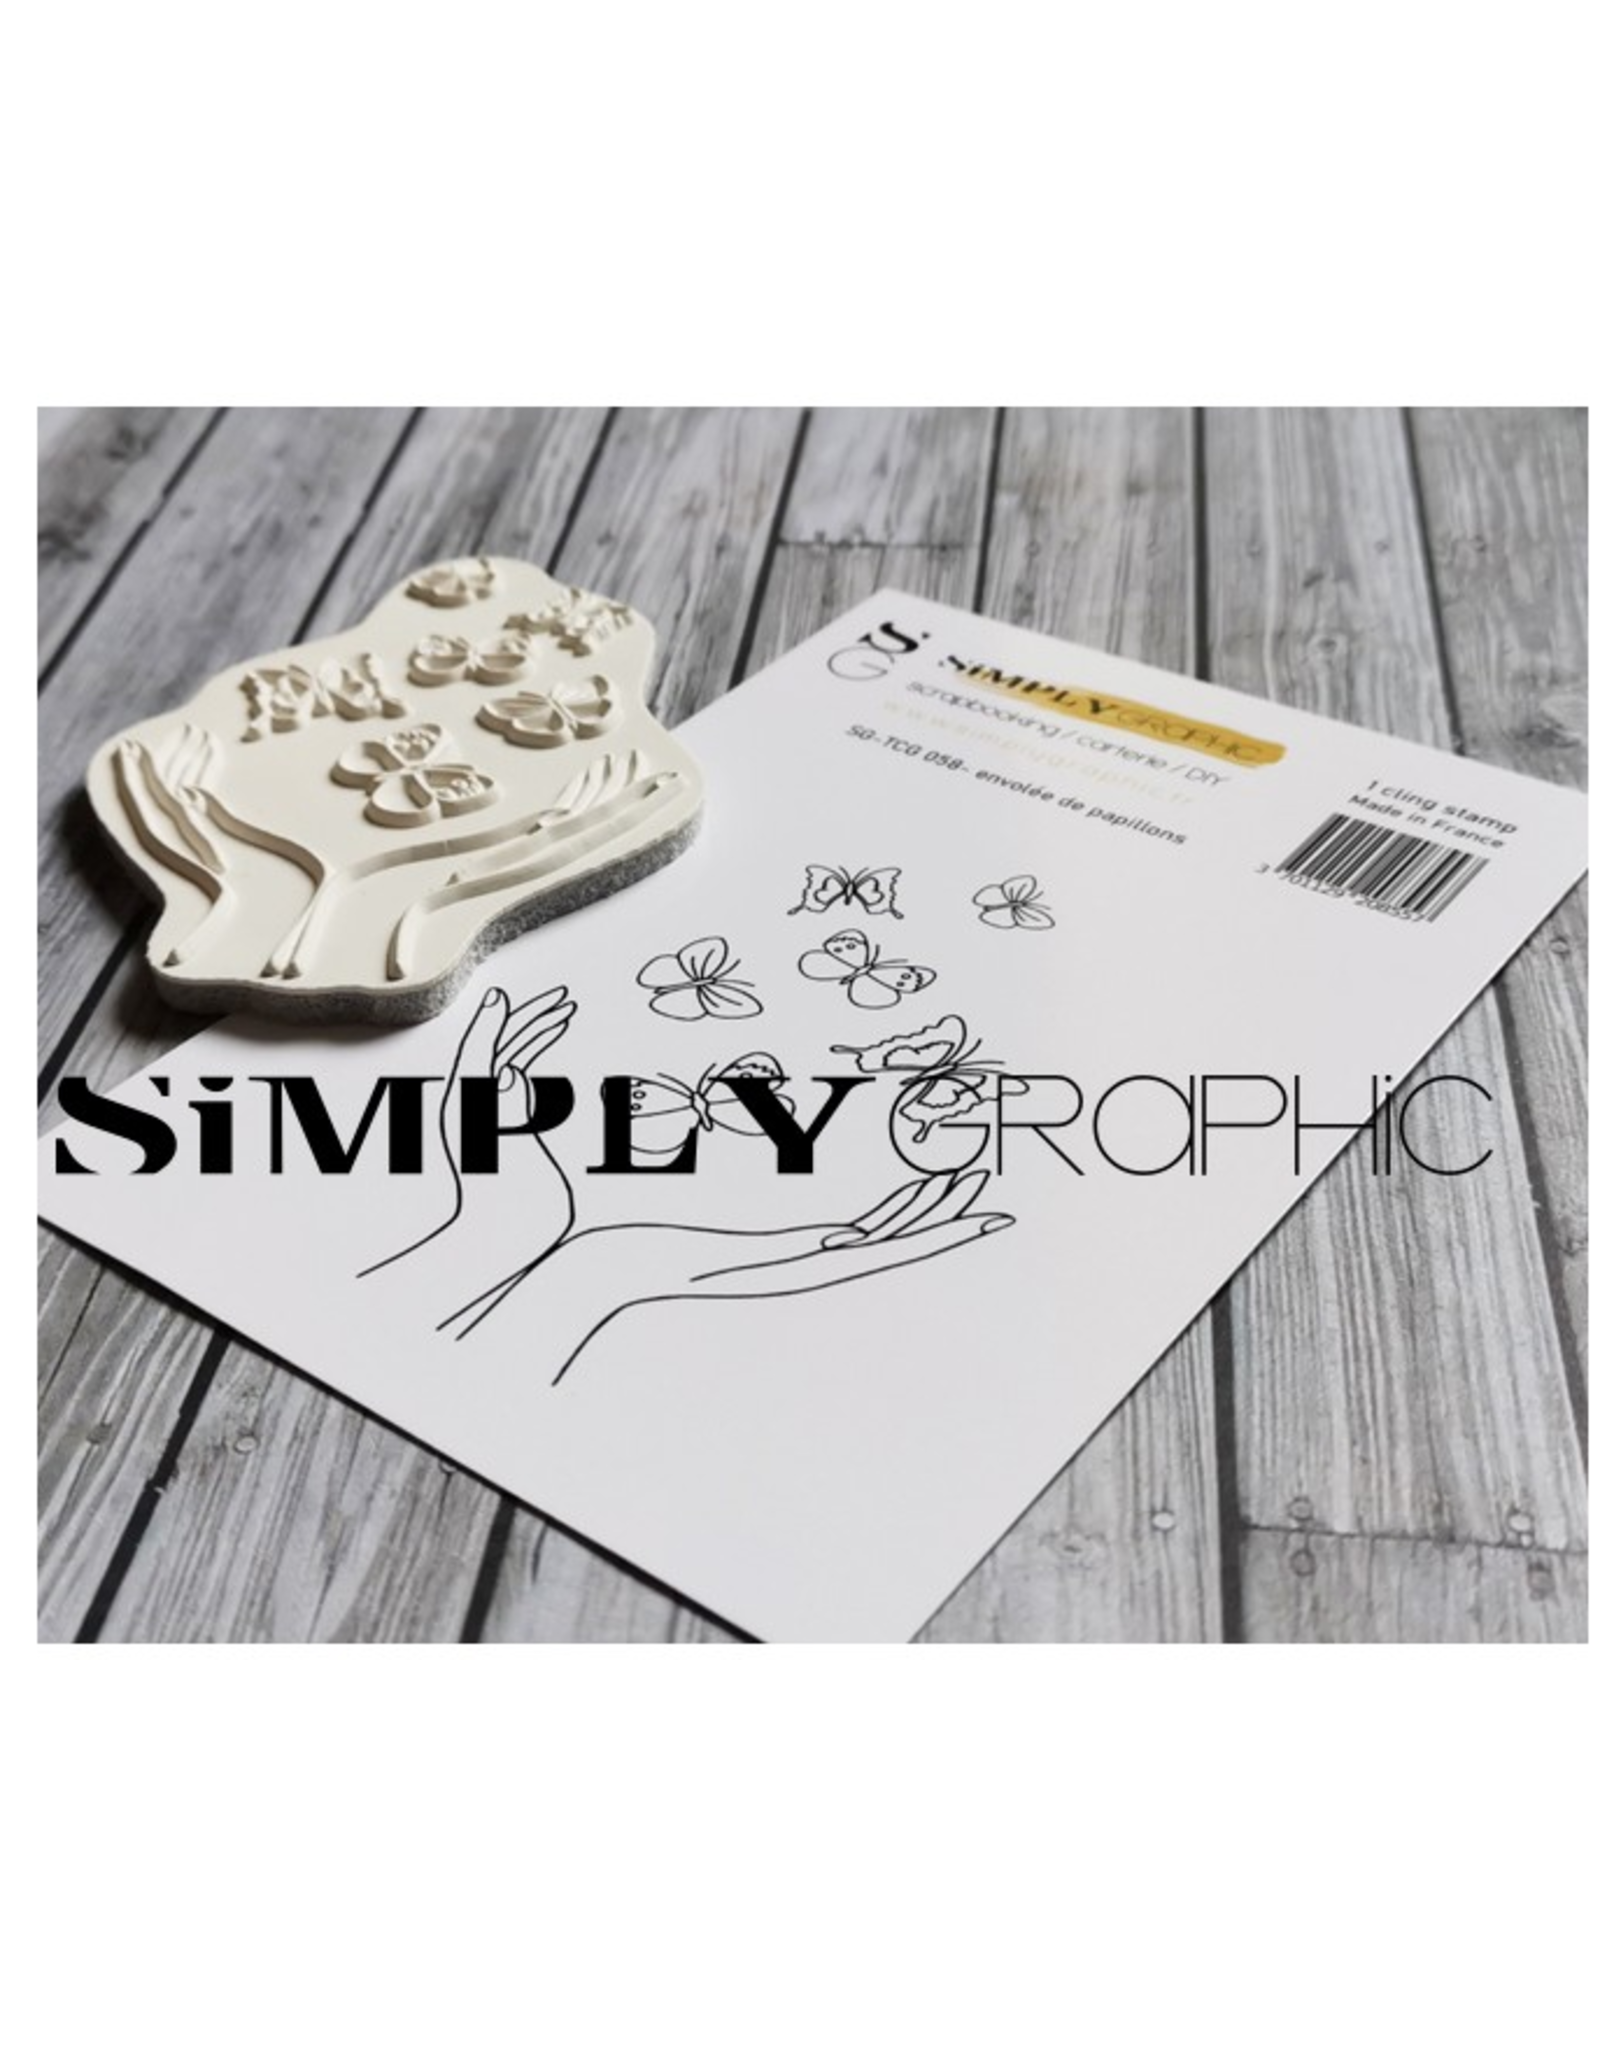 SIMPLY GRAPHIC SIMPLY GRAPHIC TAMPON ENVOLÉE DE PAPILLONS CLING STAMP